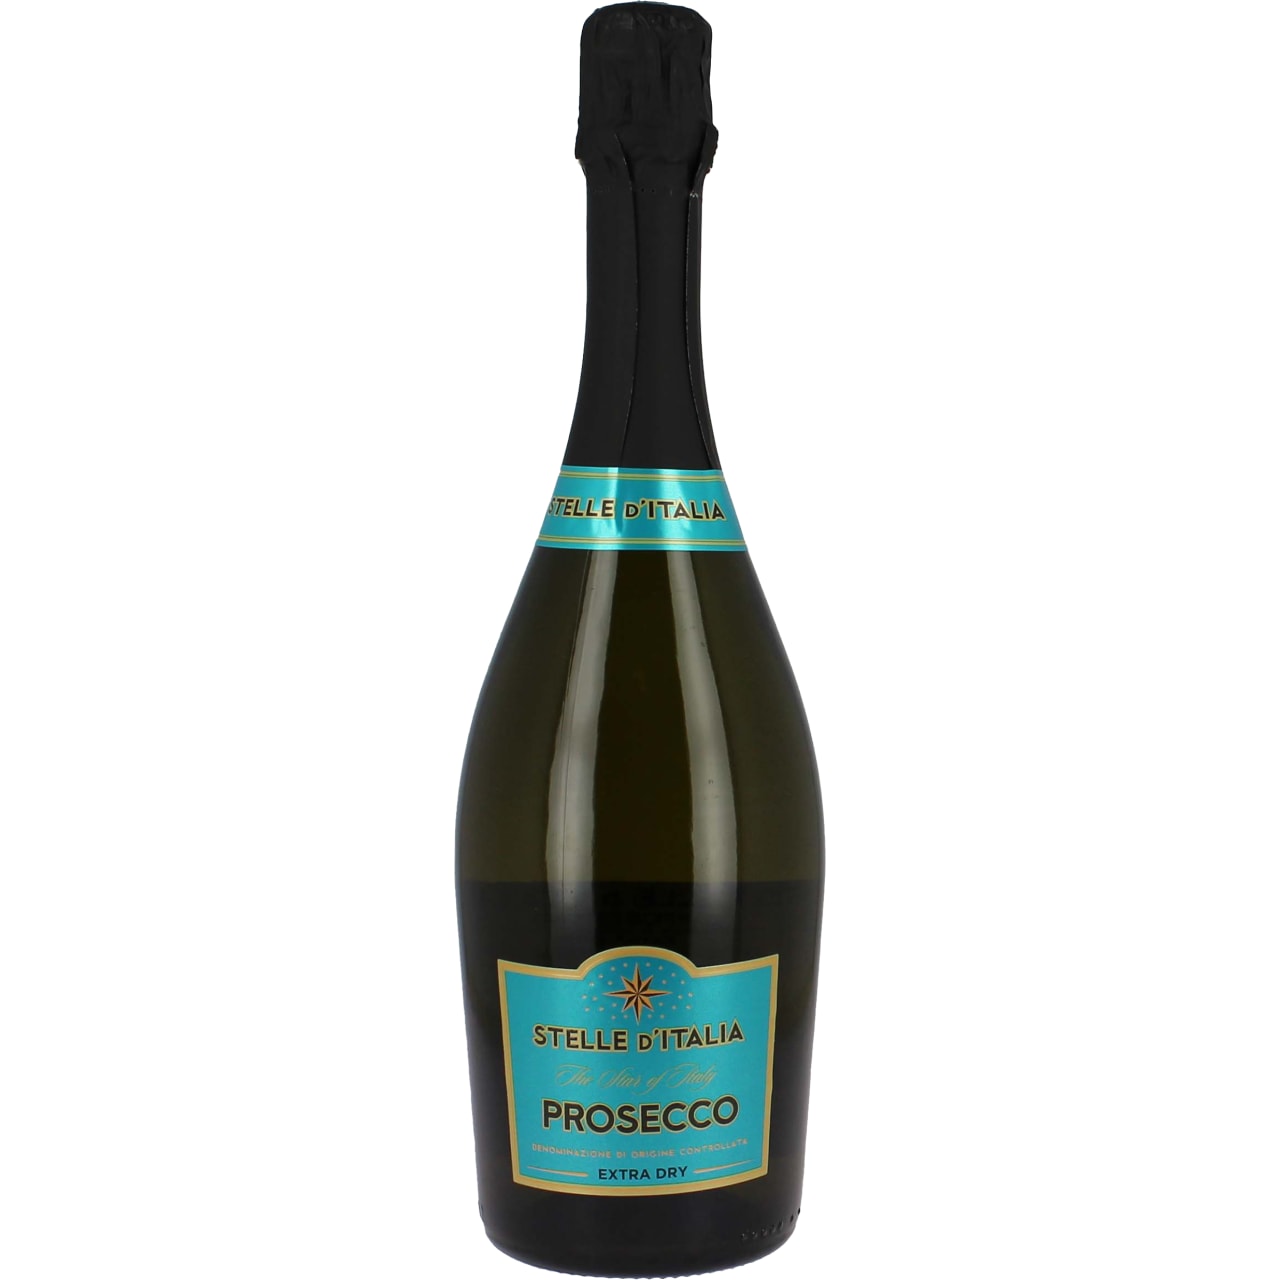 A lively crisp Prosecco with a delicate lemony character and an aromatic, dry, refreshing finish.